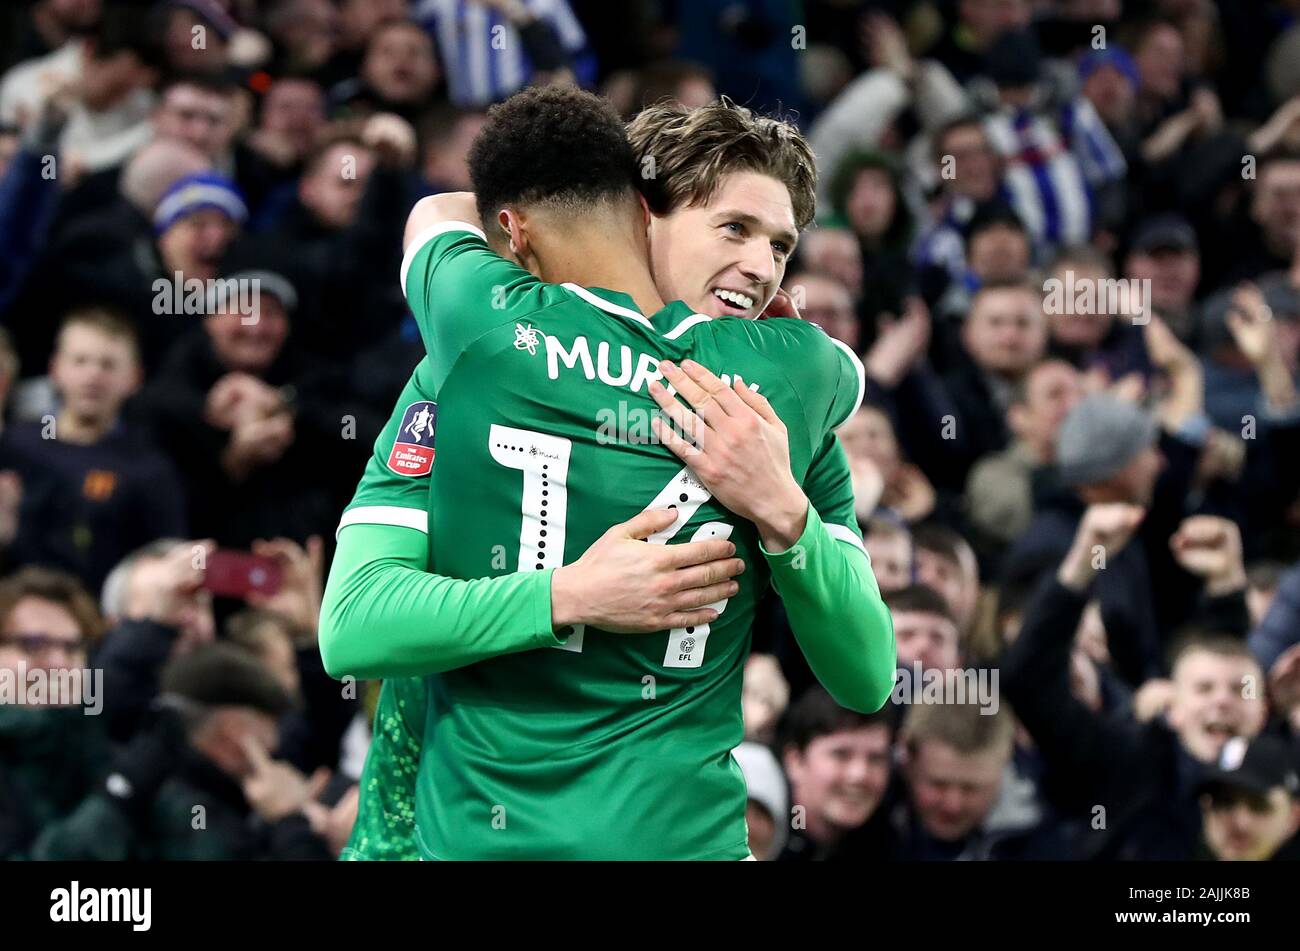 Sheffield Wednesday's Adam Reach celebrates scoring his side's first goal of the game with team-mate Jacob Murphy during the FA Cup third round match at the AMEX Stadium, Brighton. Stock Photo